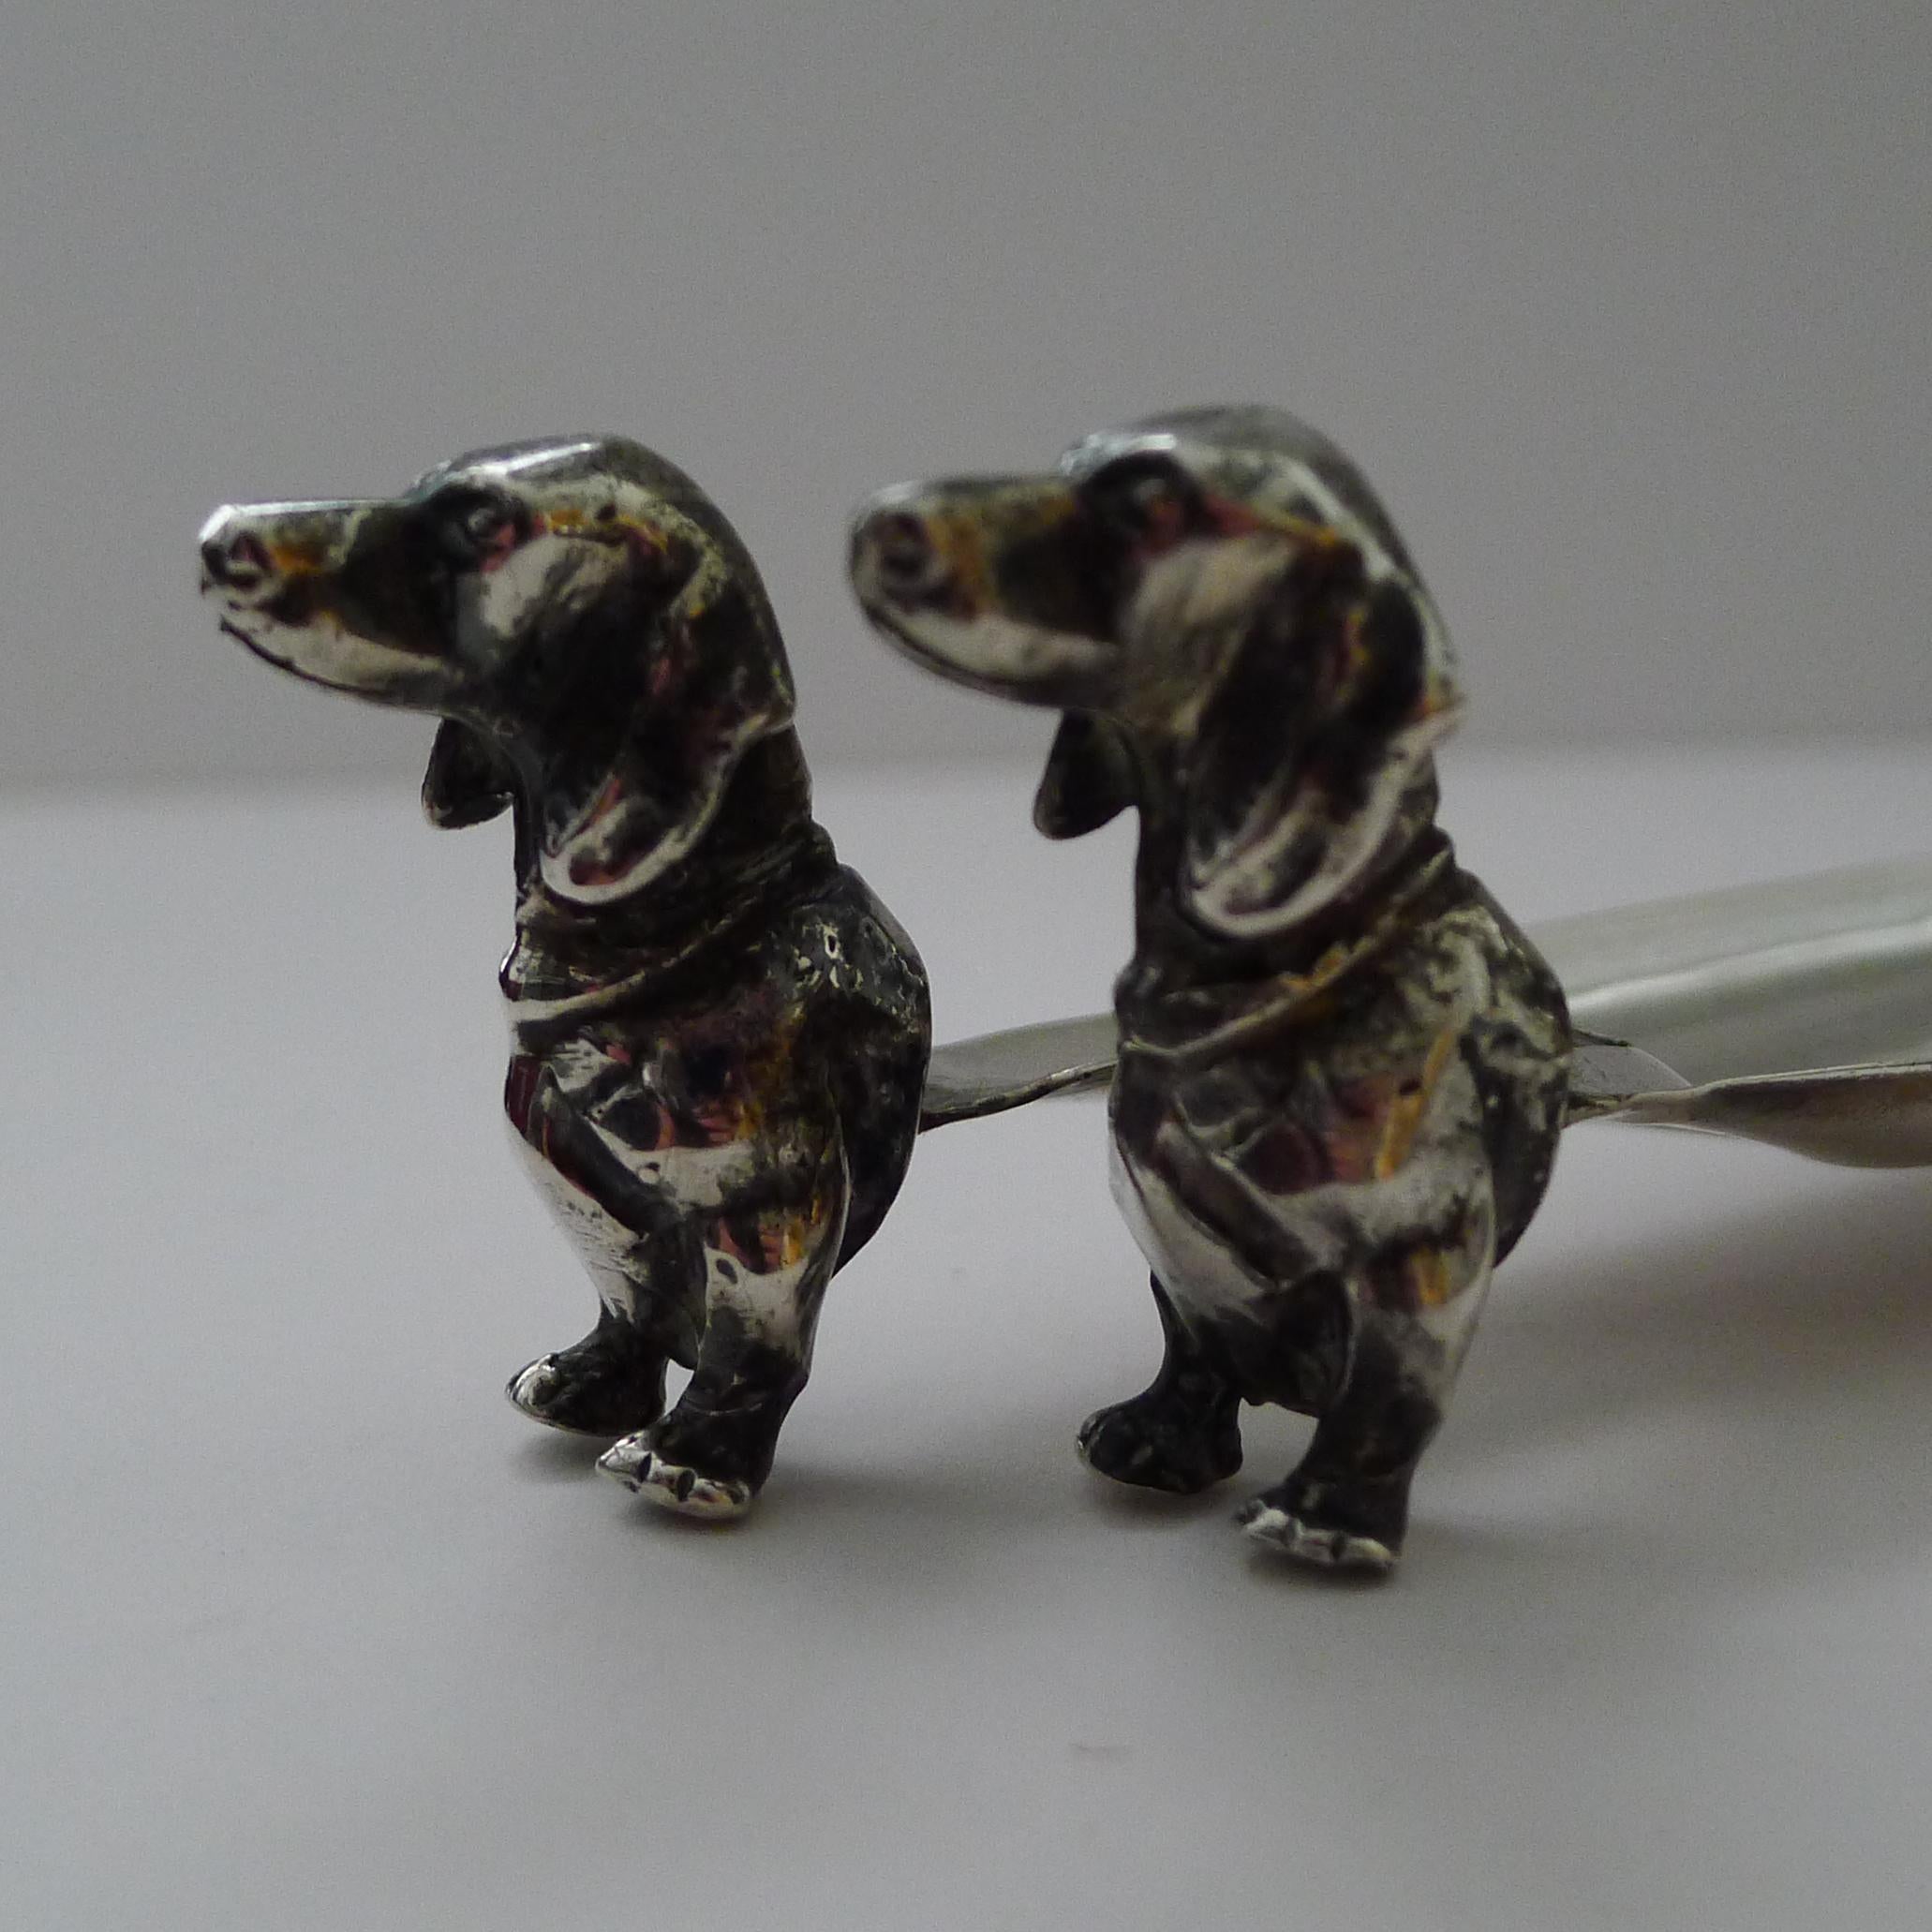 Vintage Italian Silver Dog Pen Tray - Dachshunds c.1968 In Good Condition For Sale In Bath, GB